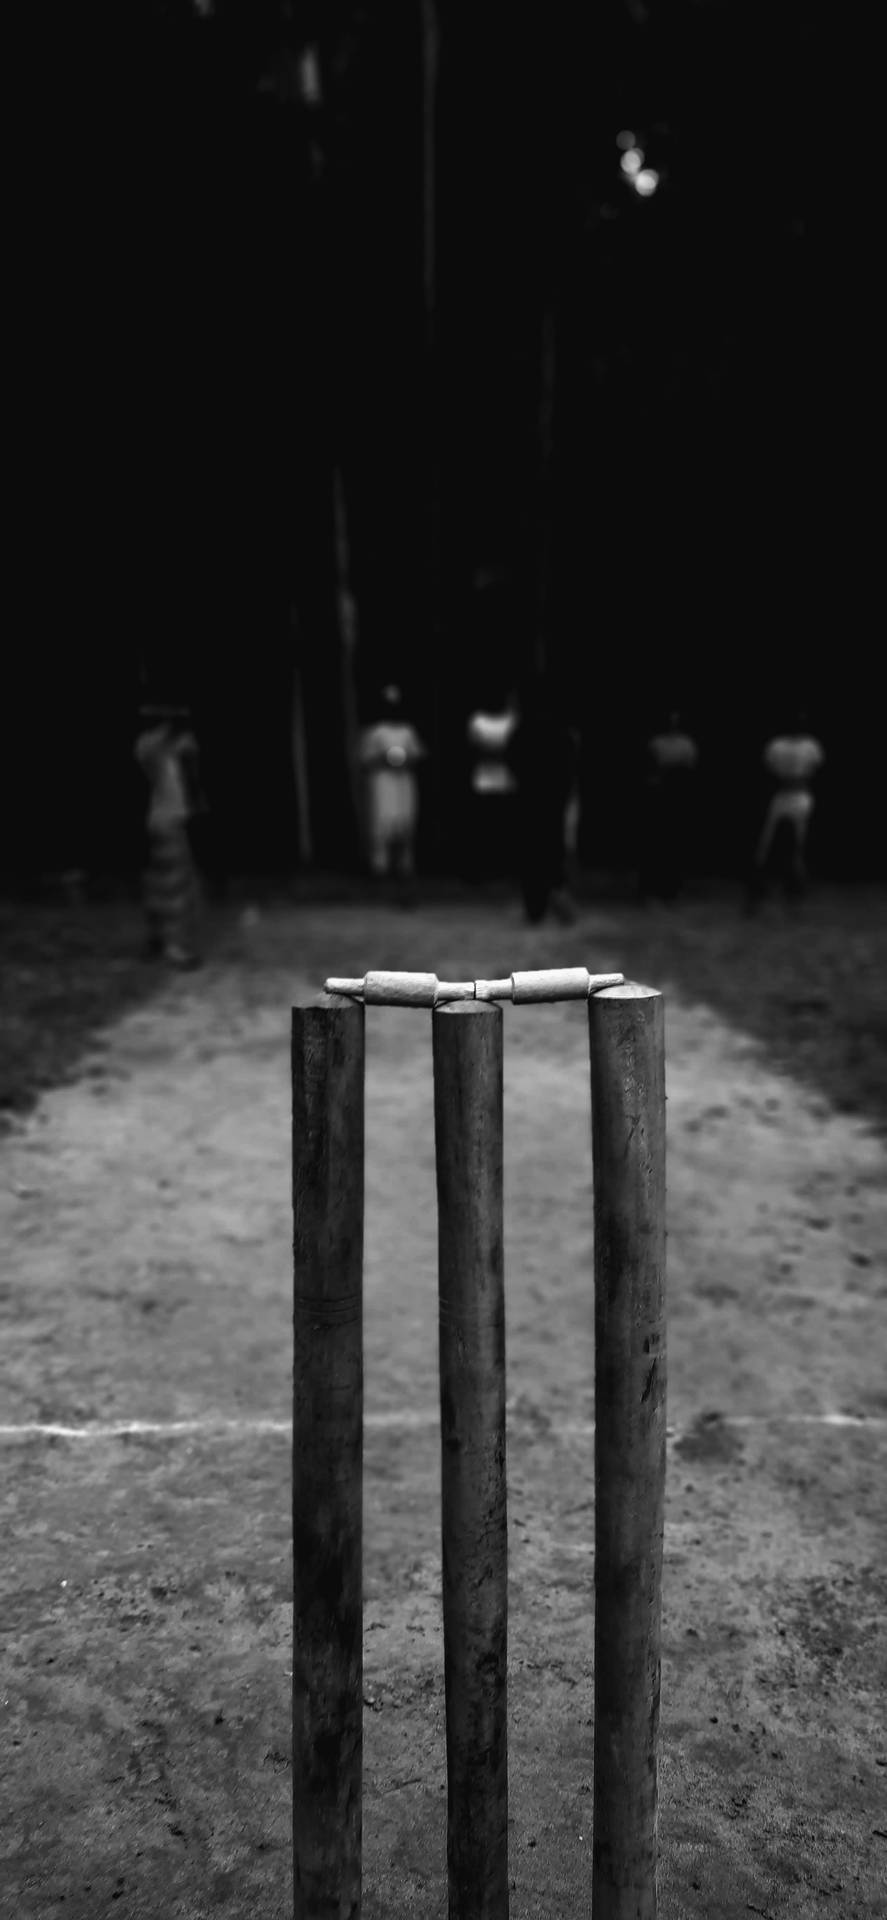 Cricket Wooden Stump In Greyscale